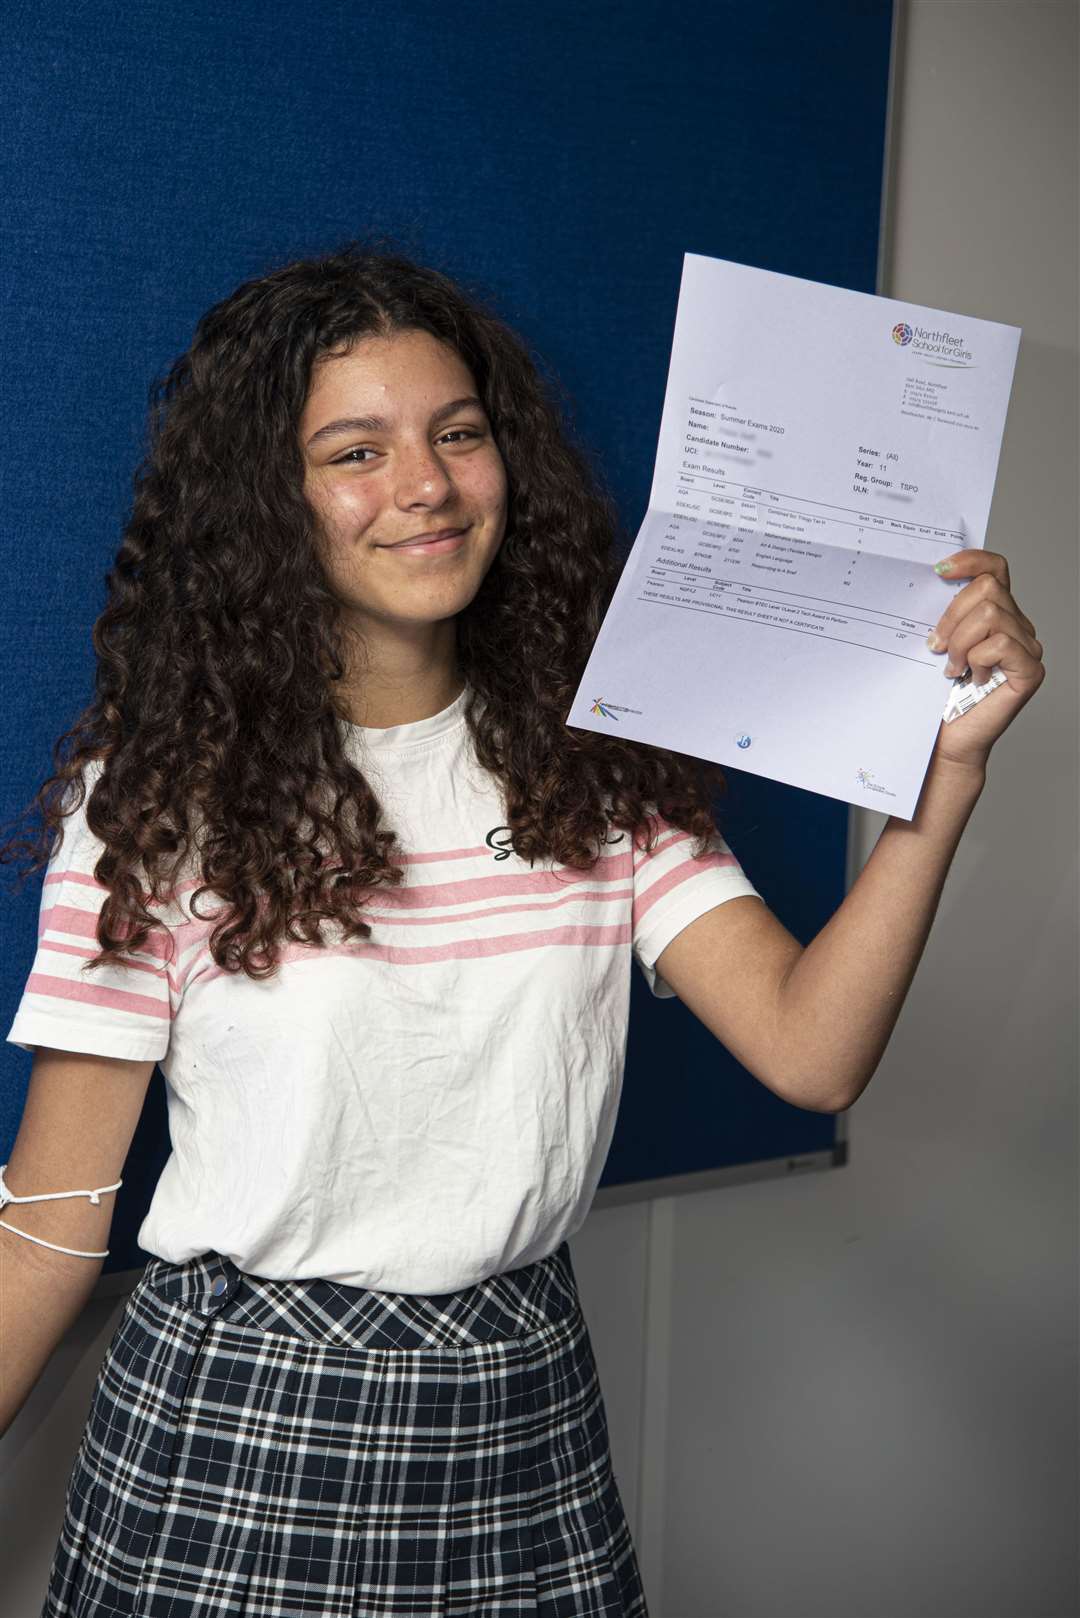 A delighted Freya Swift from Northfleet School for Girls on GCSE results day